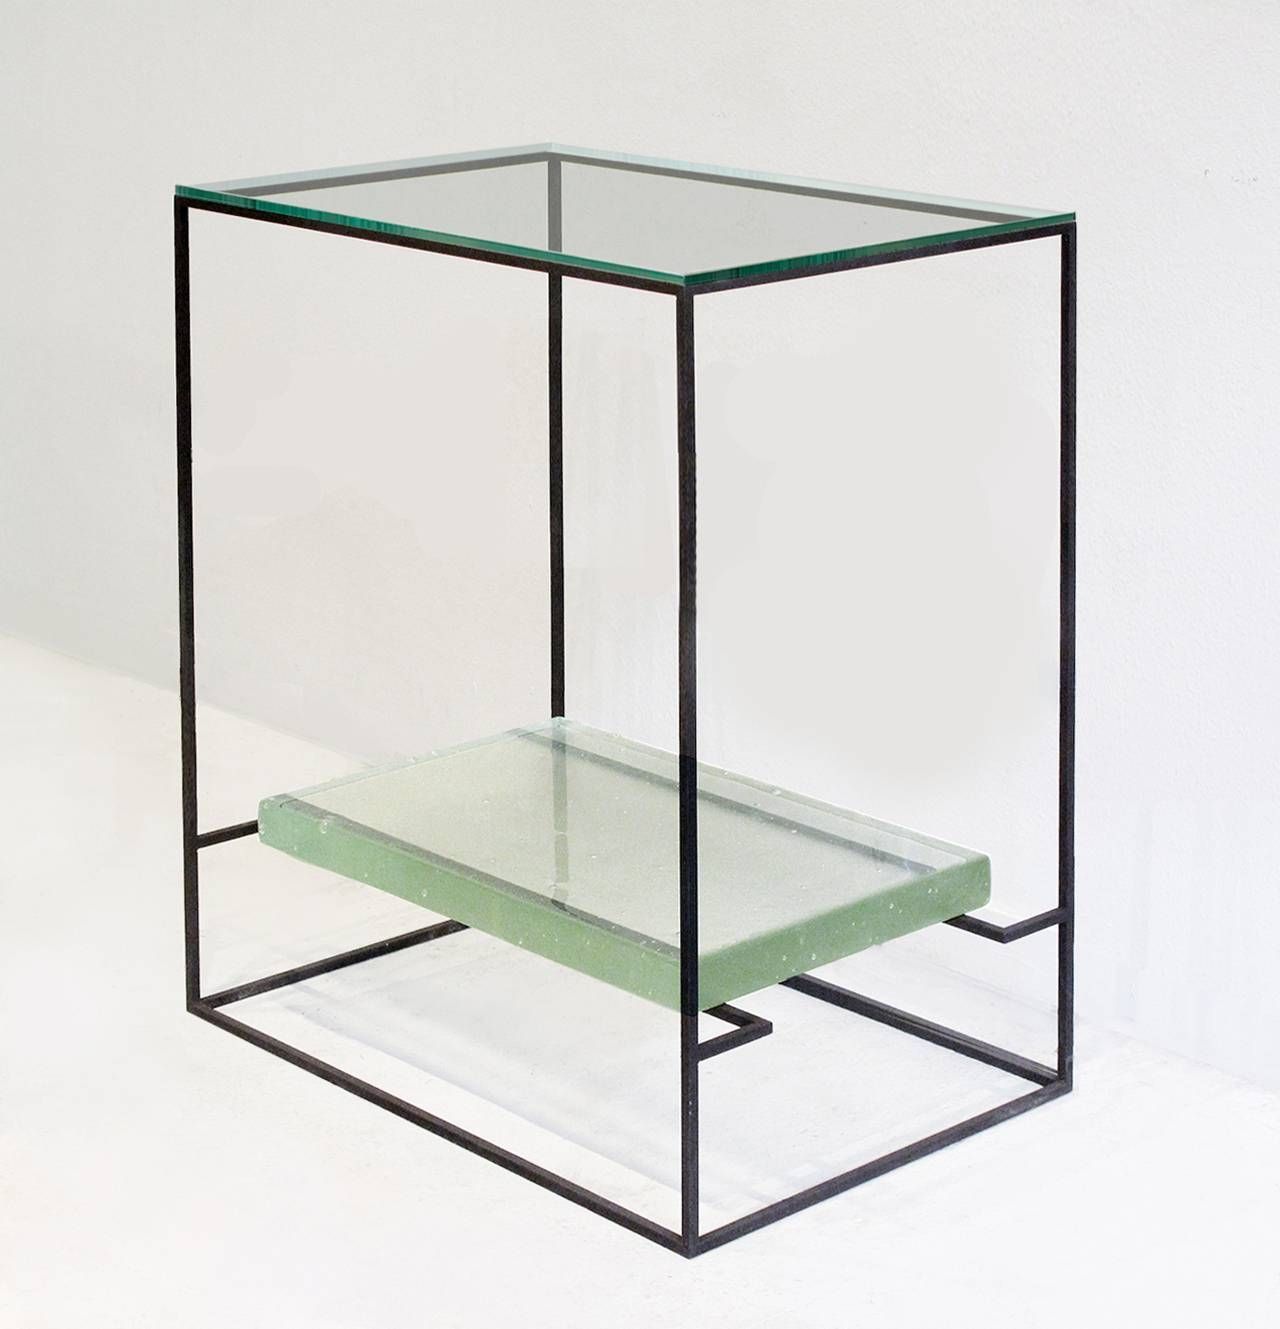 Codor Design | Current Stock Regarding Floating Glass Coffee Tables (View 30 of 30)